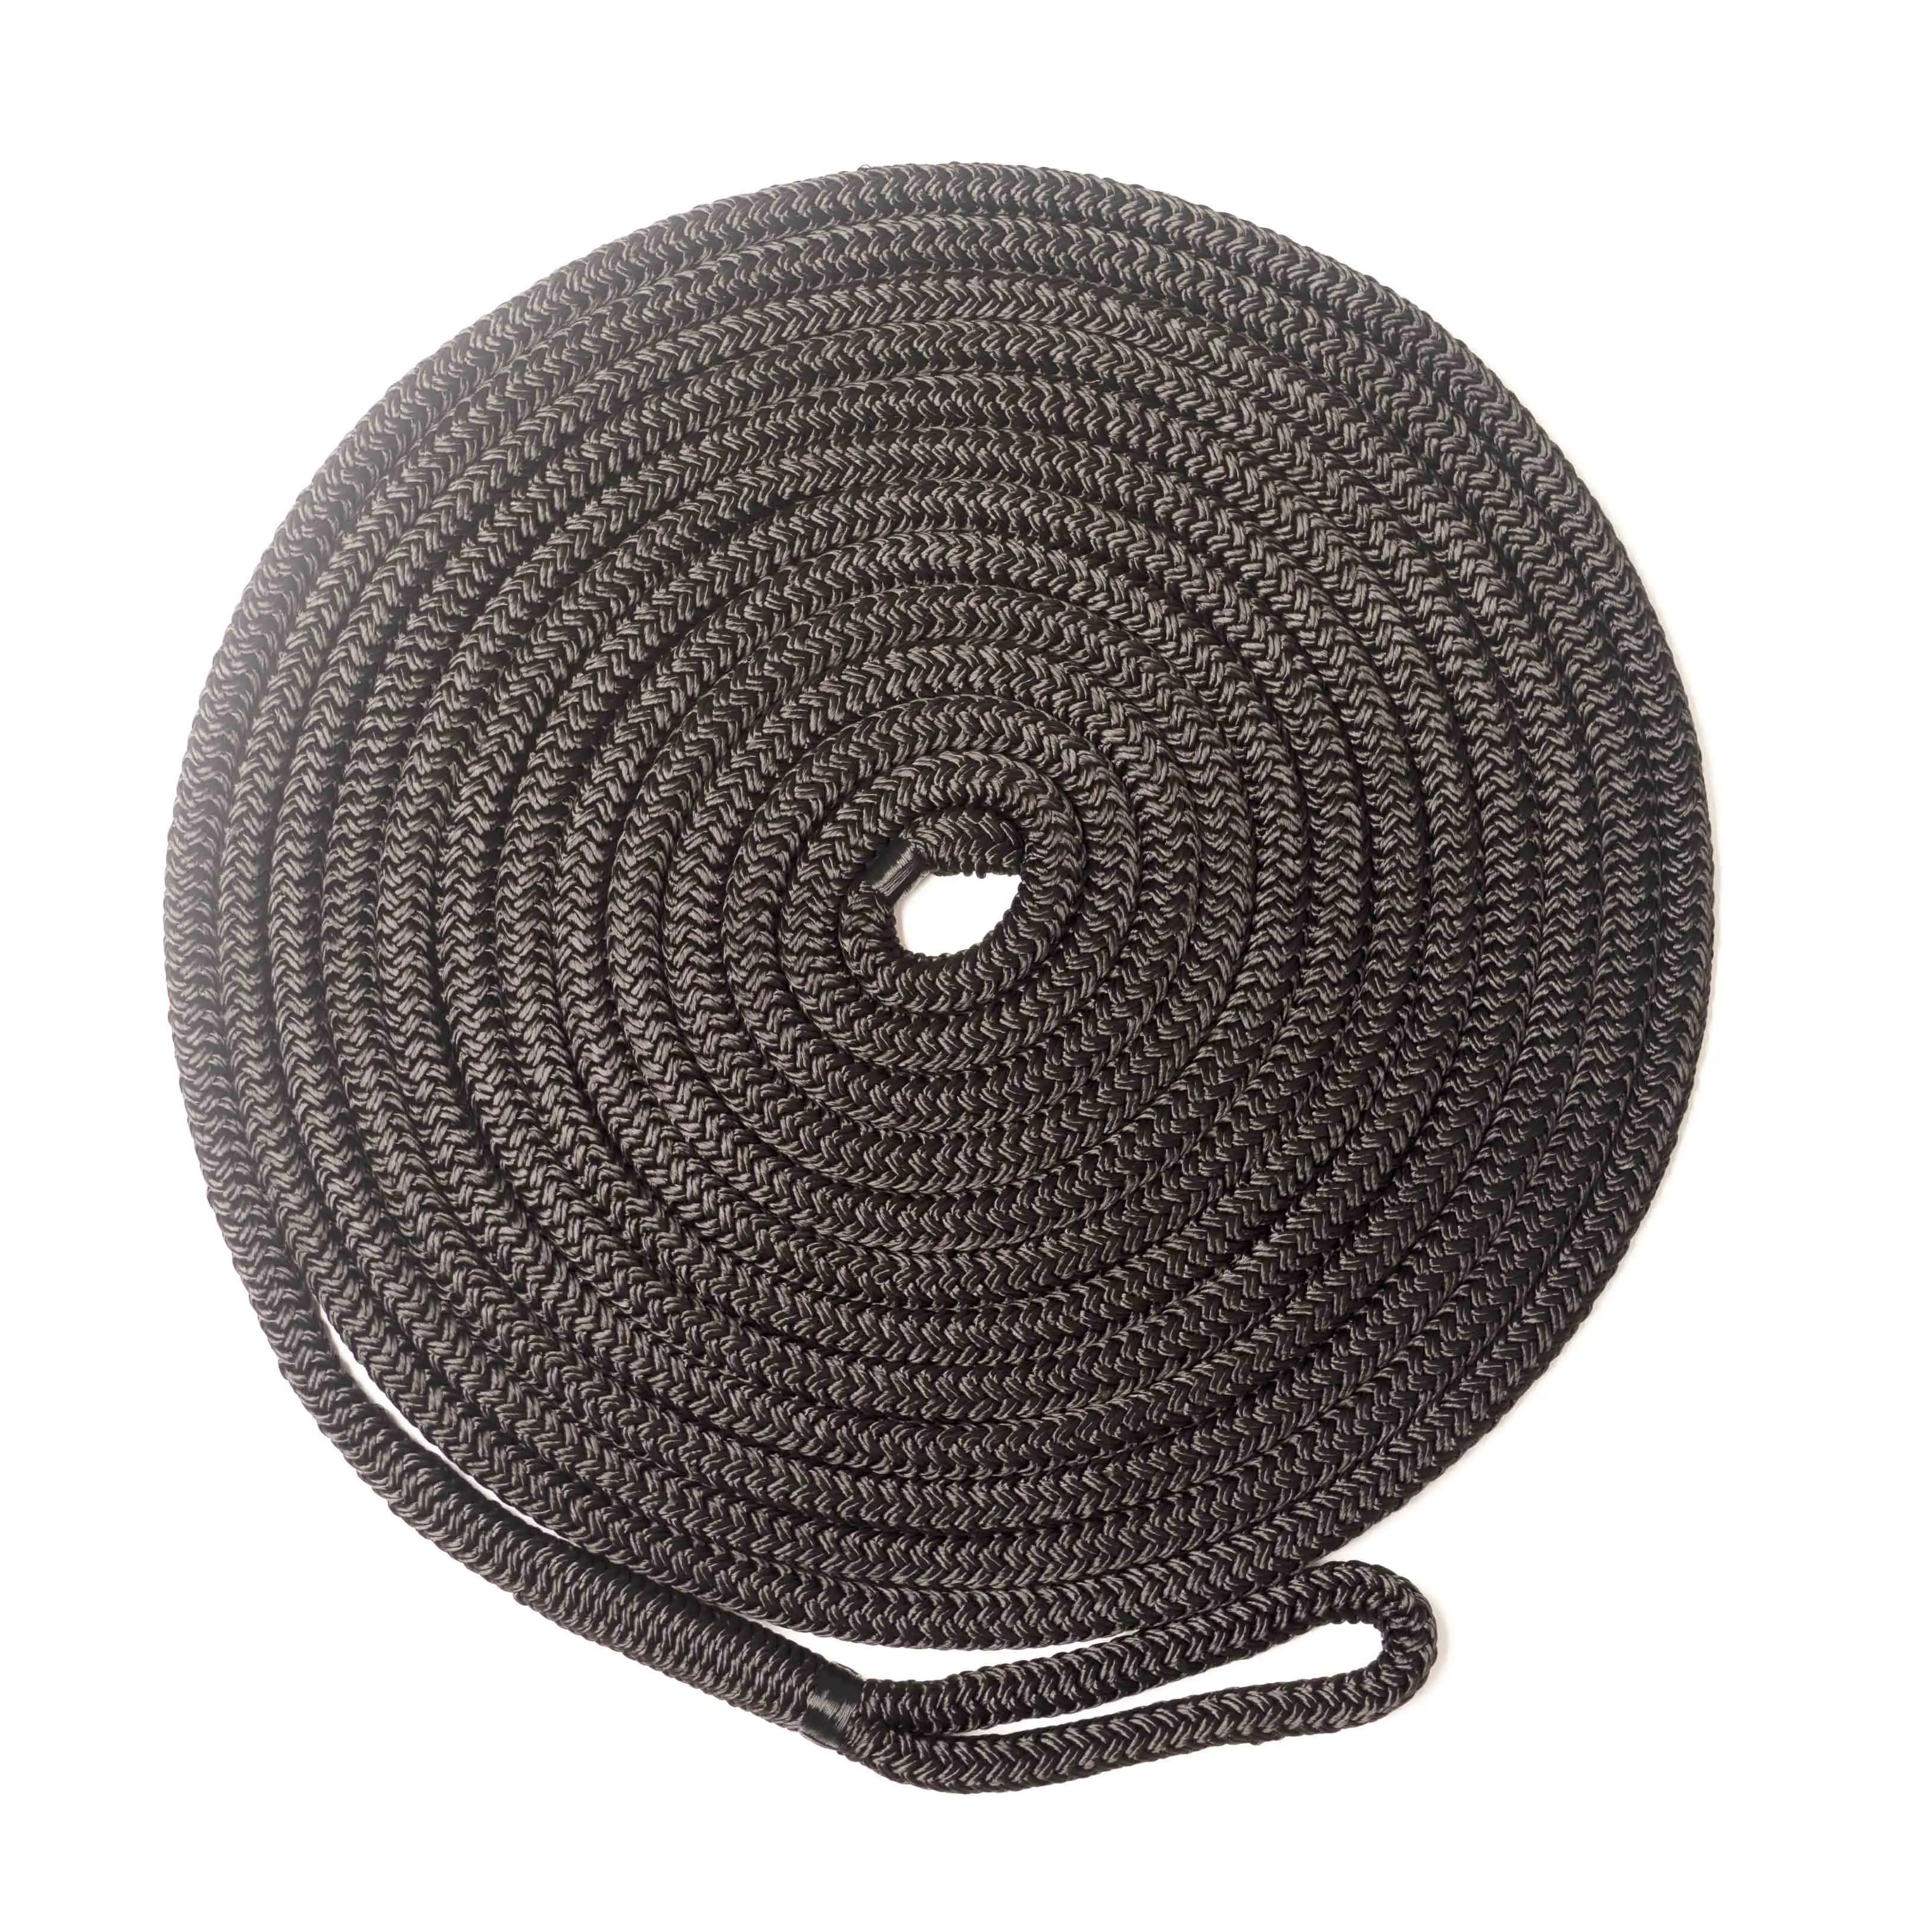 1/2 inch nylon polyester double braided dock line marine rope